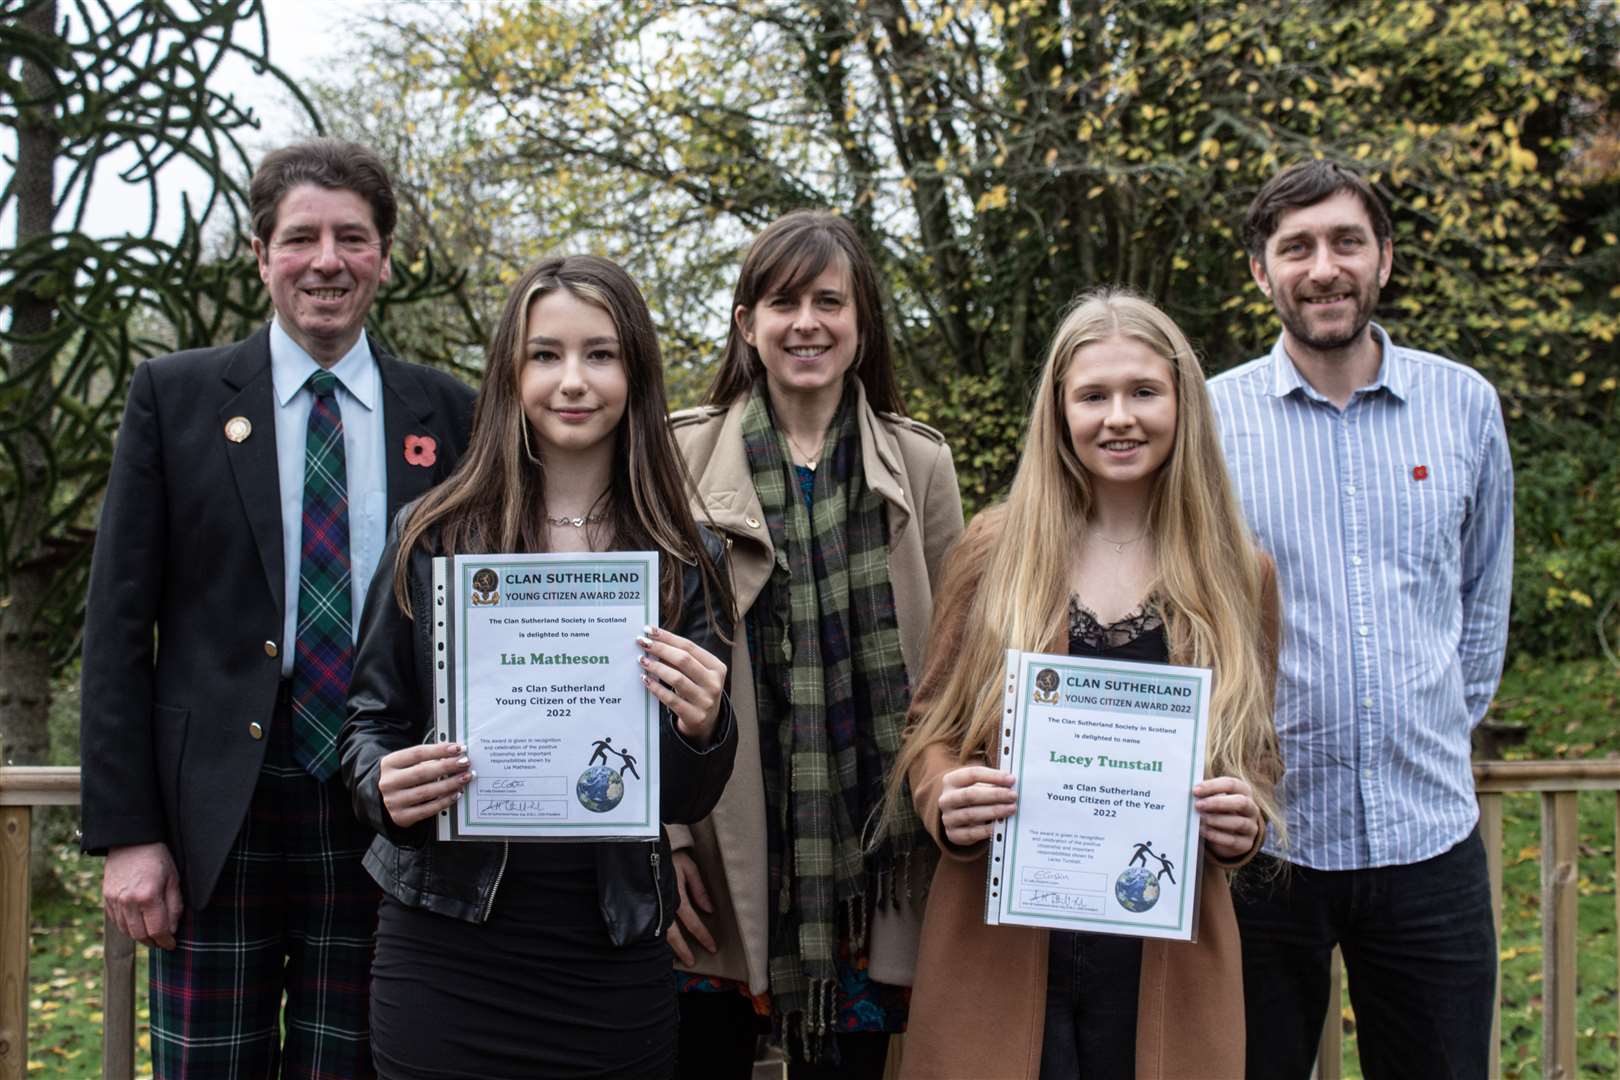 Mark Sutherland-Fisher, president of the Clan Sutherland Society in Scotland, Lia Matheson, Dr Lady Elizabeth Costin, representative of the clan chief’s family, Lacey Tunstall and Northern Times content editor John Davidson.